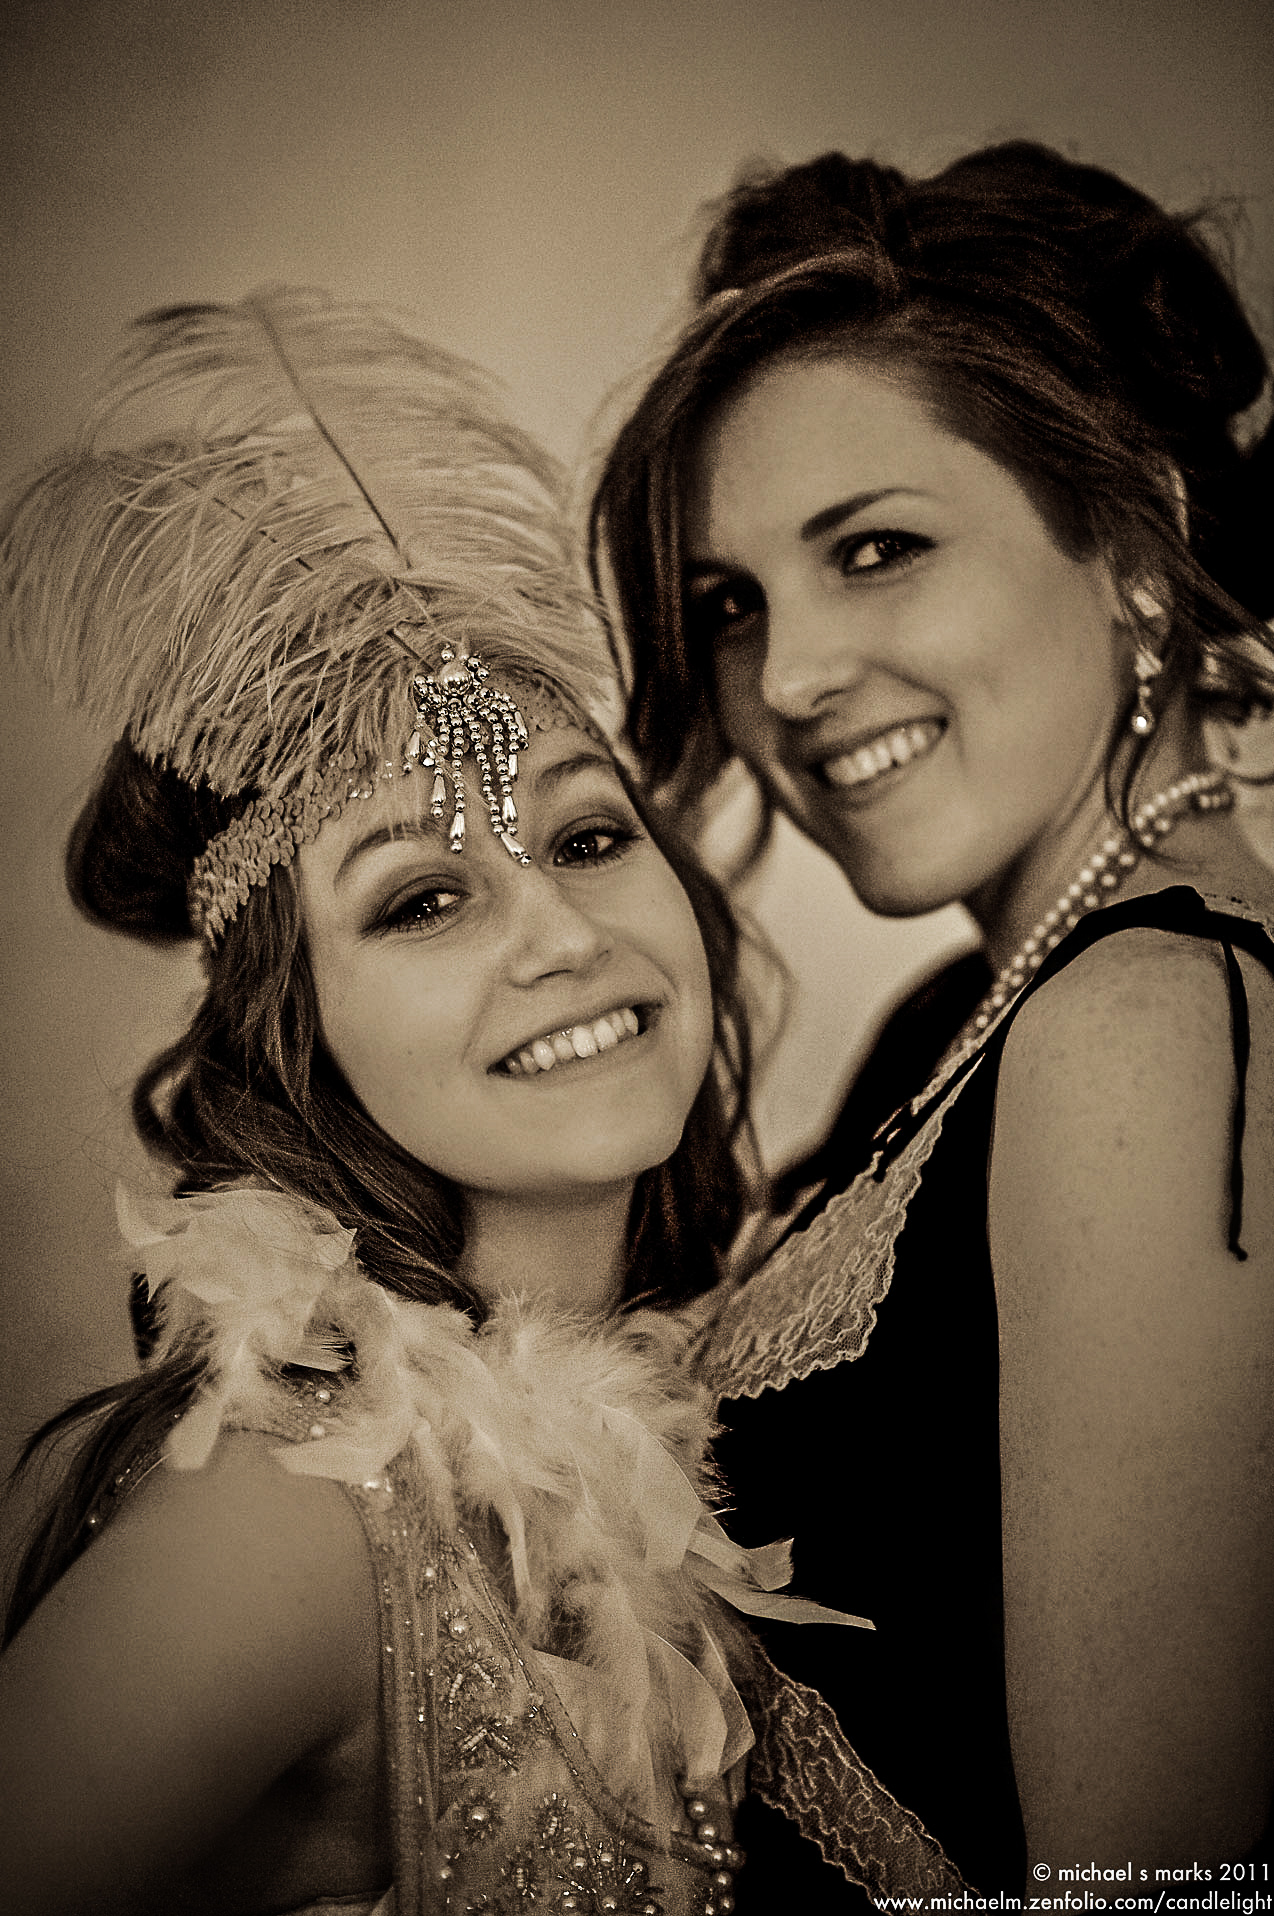 Two ladies in 1920s costume